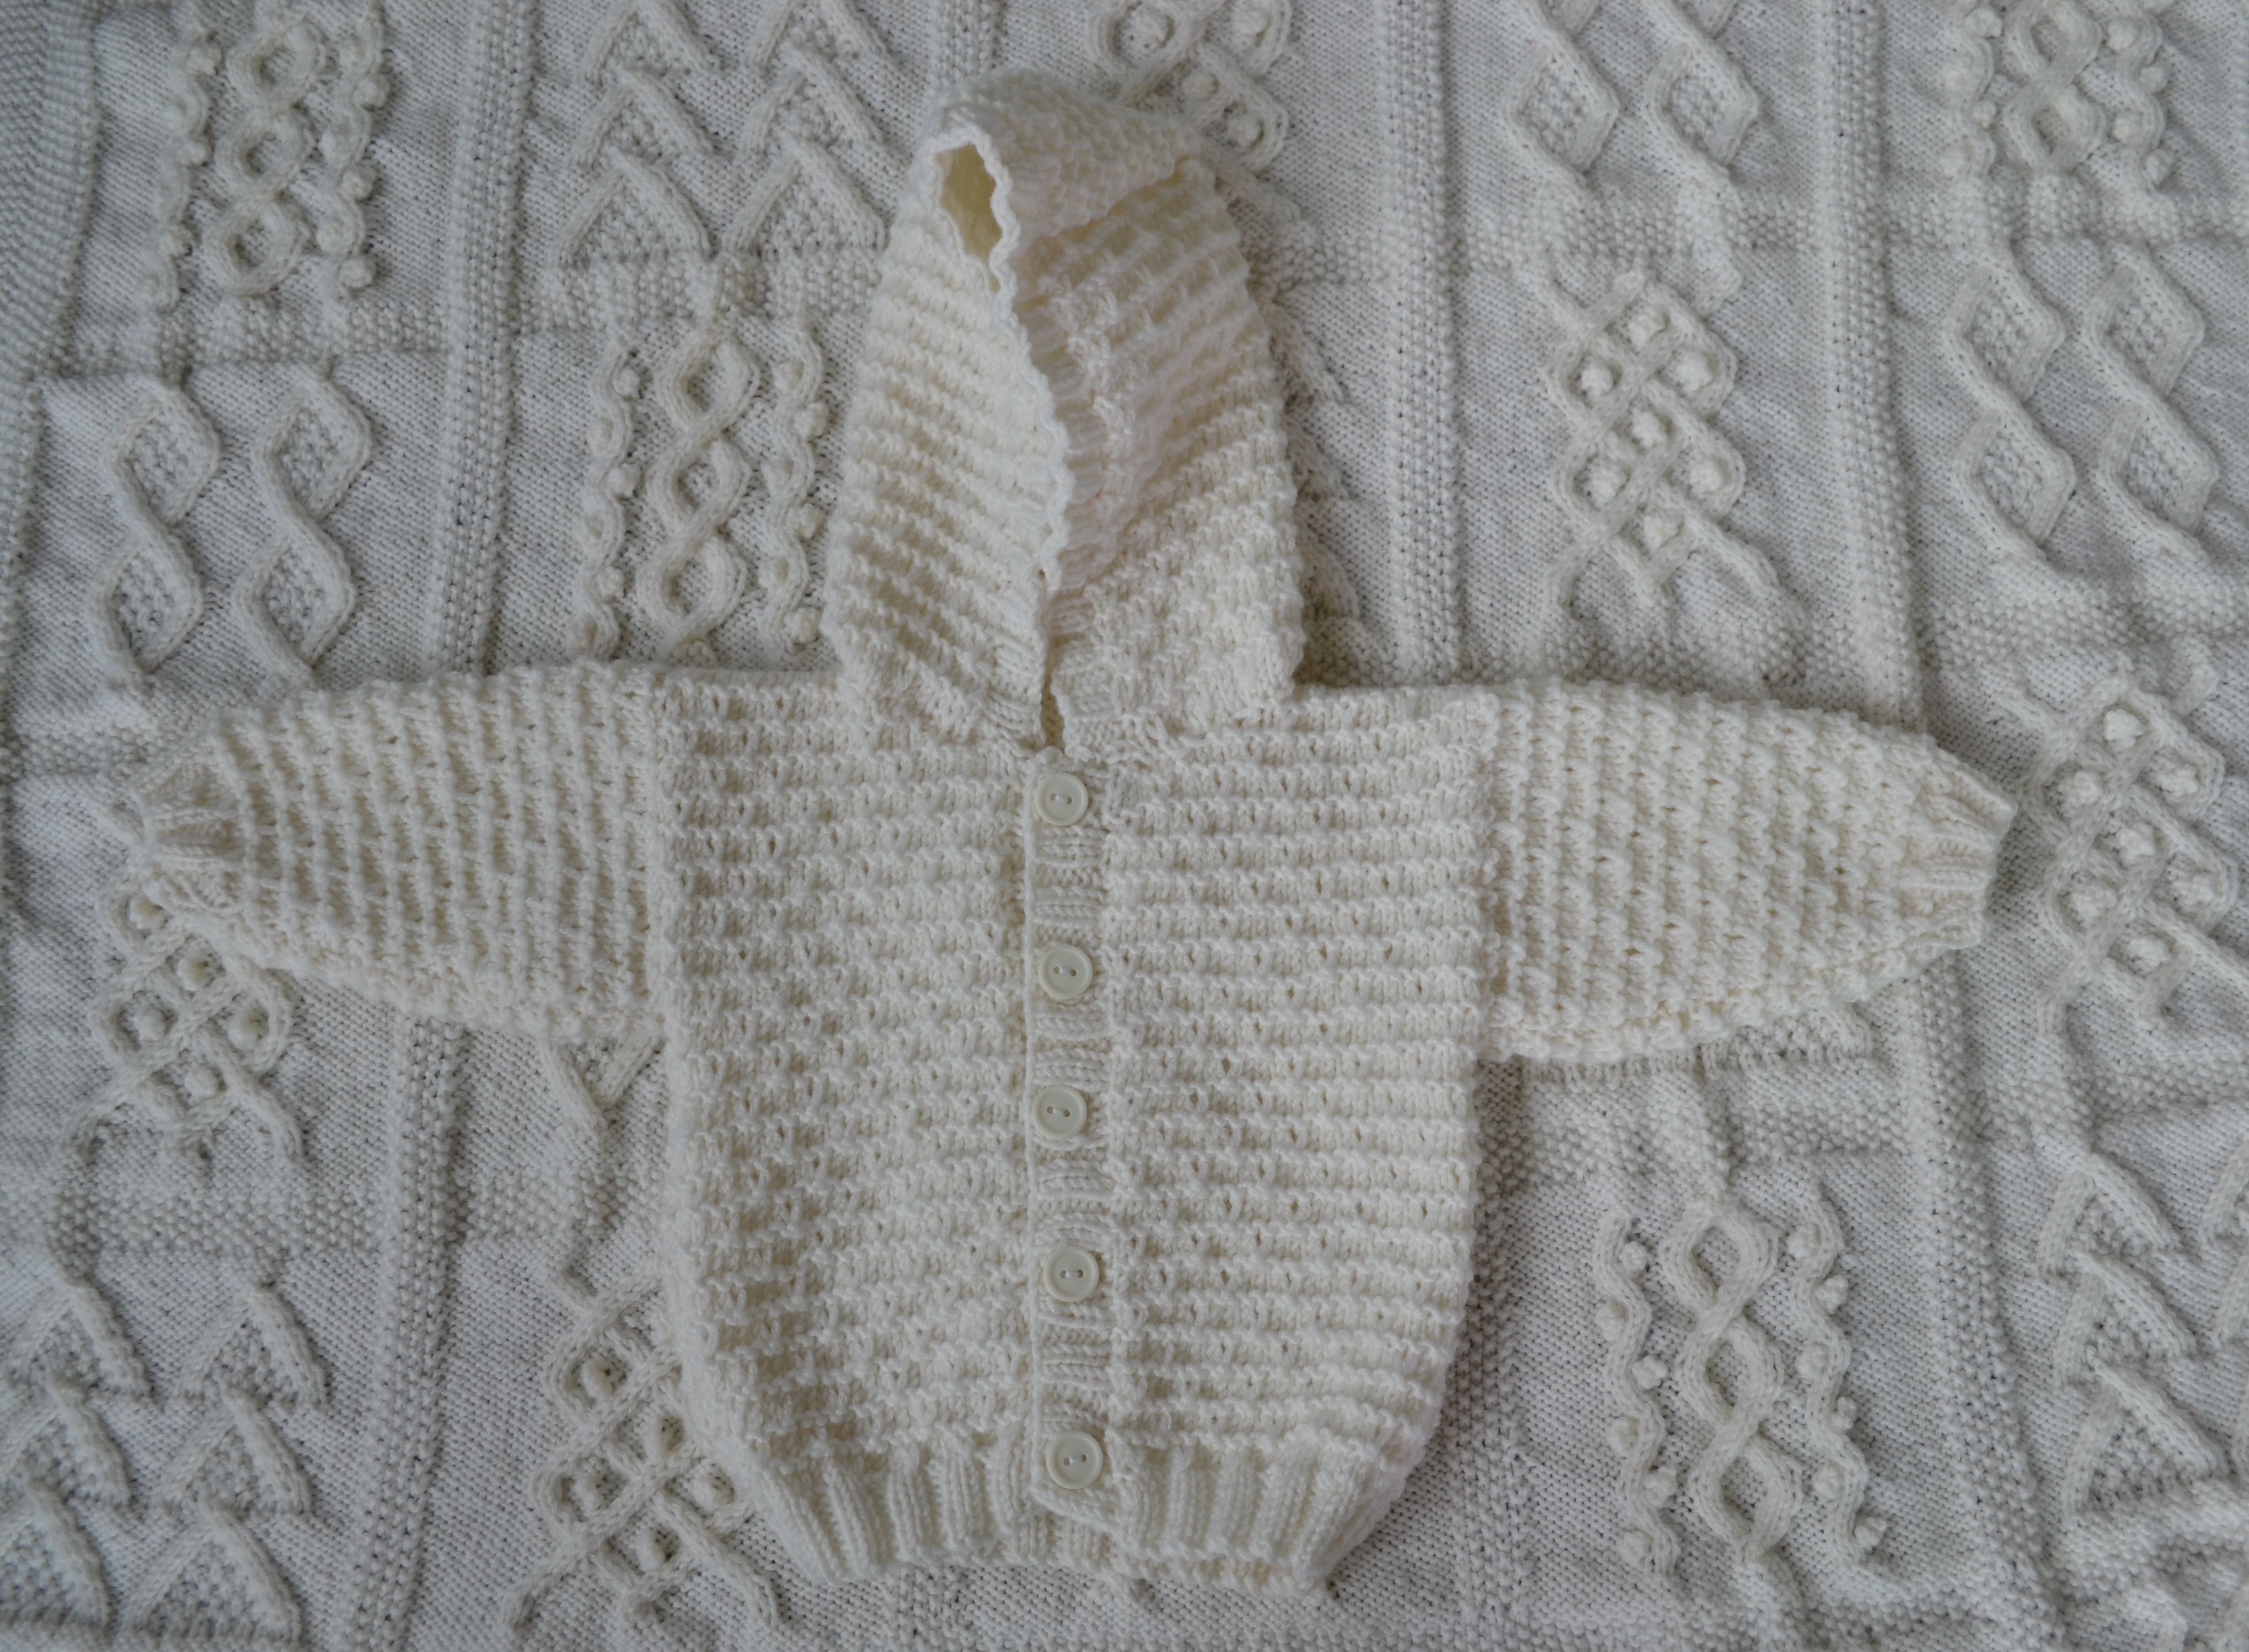 New Born Knitting Patterns Double Knit Hoody For A Newborn Ba Is It A Bit Too Bulky